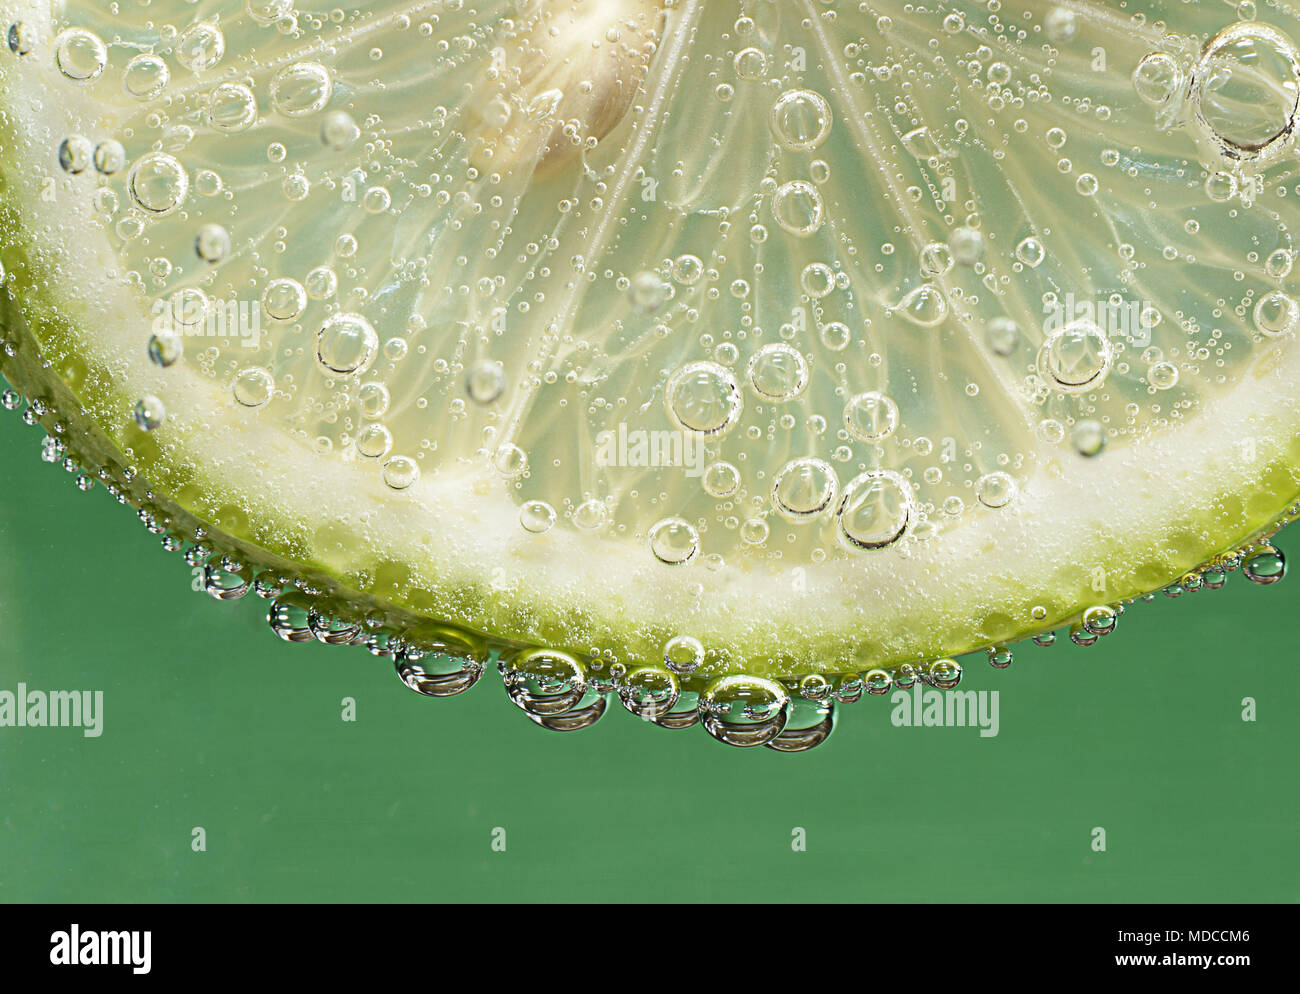 Effervescent Lime - Static Stock Photo